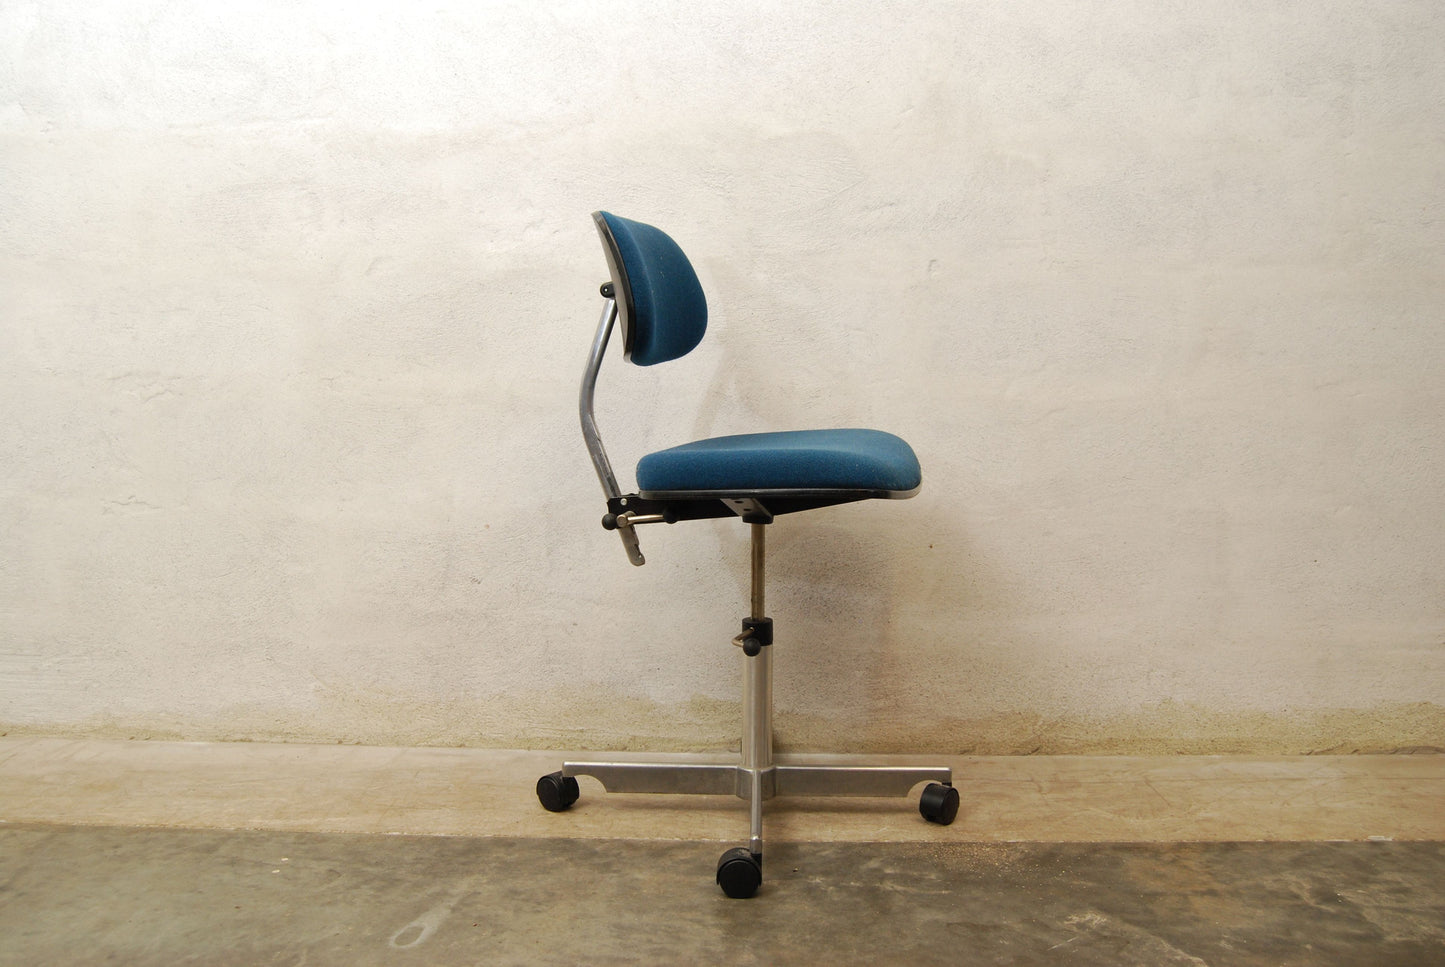 Desk chair by KEVI no. 1